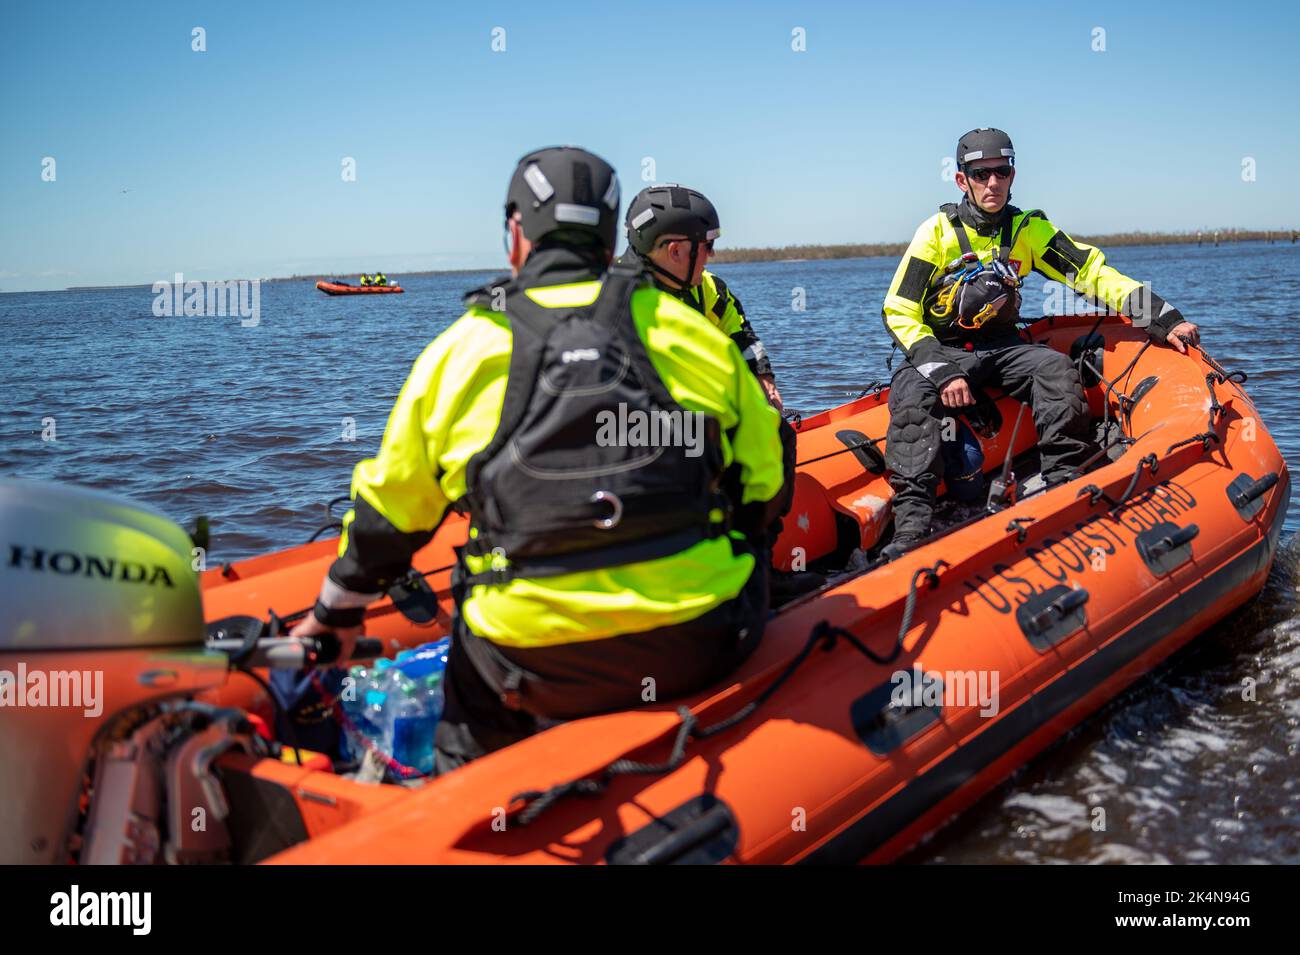 Coast Guard personnel from the Gulf, Atlantic, and Pacific Strike teams during search and rescue operations to assist stranded people on Sept. 30, 2022 near Sanibel Island, Florida. Sanibel Island community members were stranded after Hurricane Ian made landfall in the area. Stock Photo